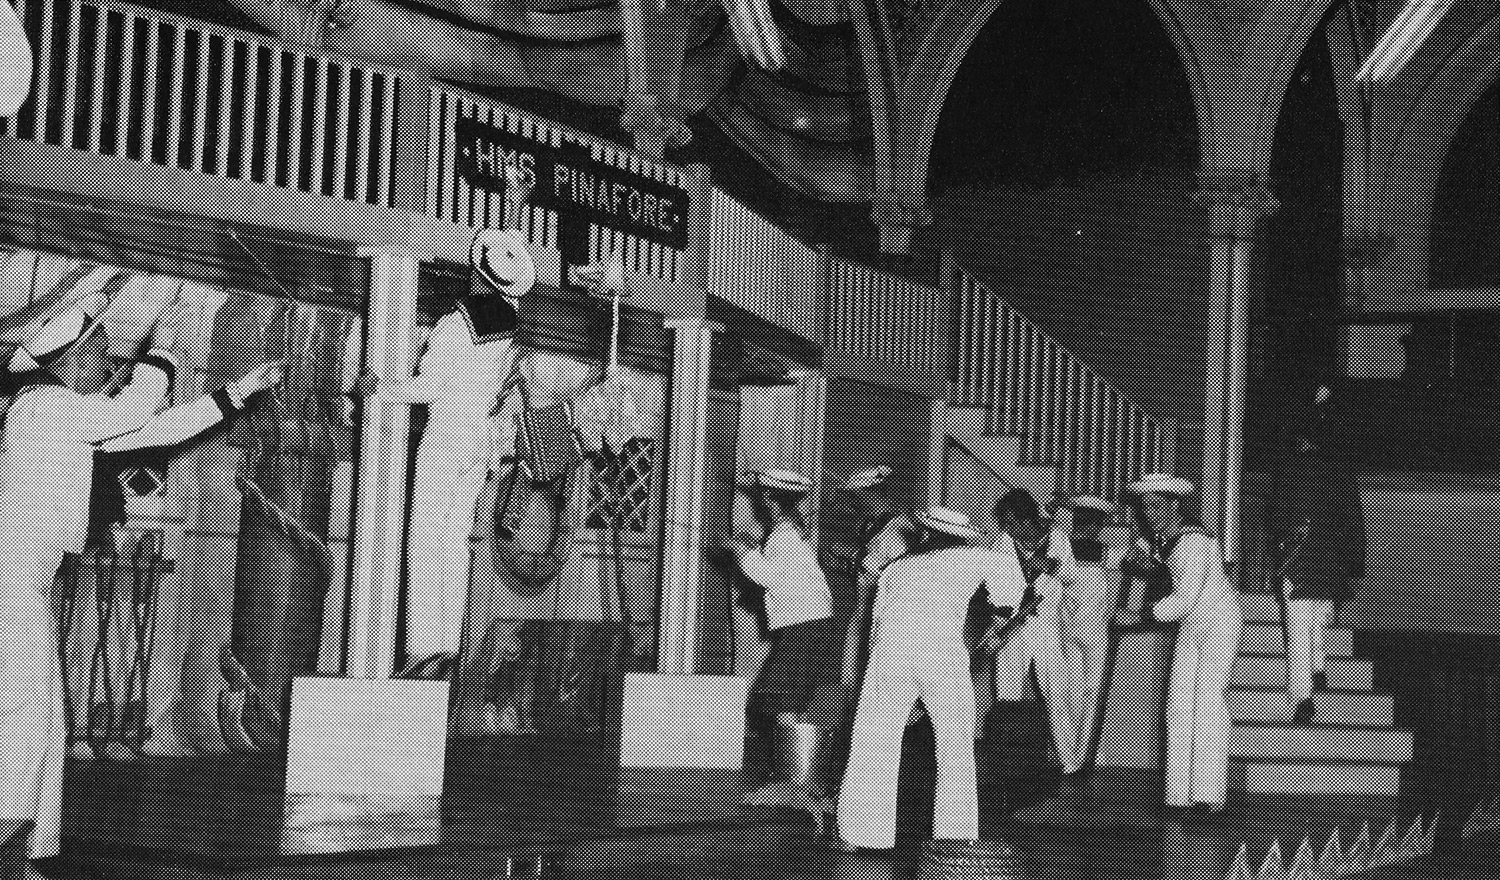 Ryerson Opera Workshop’s 1956 production of Gilbert and Sullivan’s H.M.S. Pinafore. Ryersonian Yearbook 1956